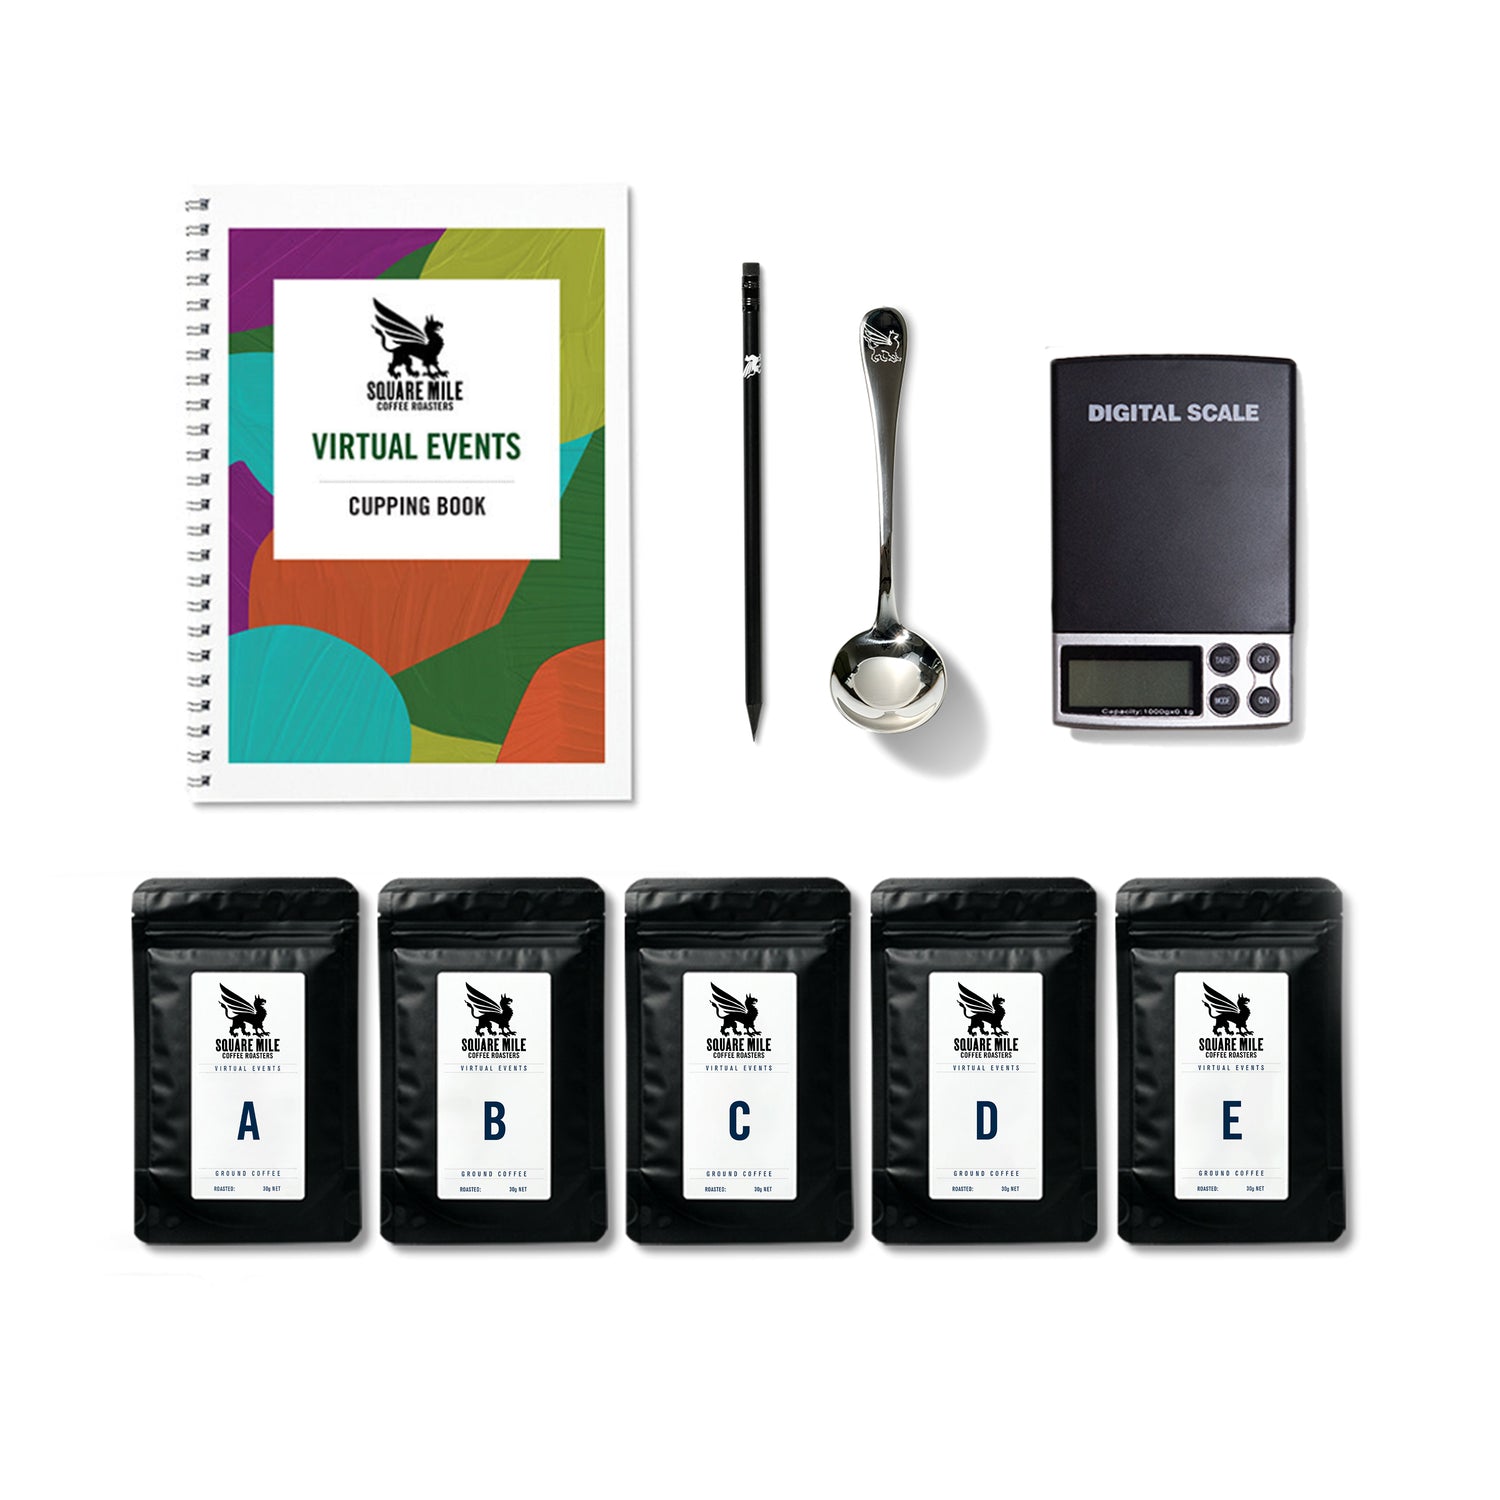 The contents of a Square Mile coffee tasting kit including a cupping book, coffee bags, cupping spoon, pencil and scale.